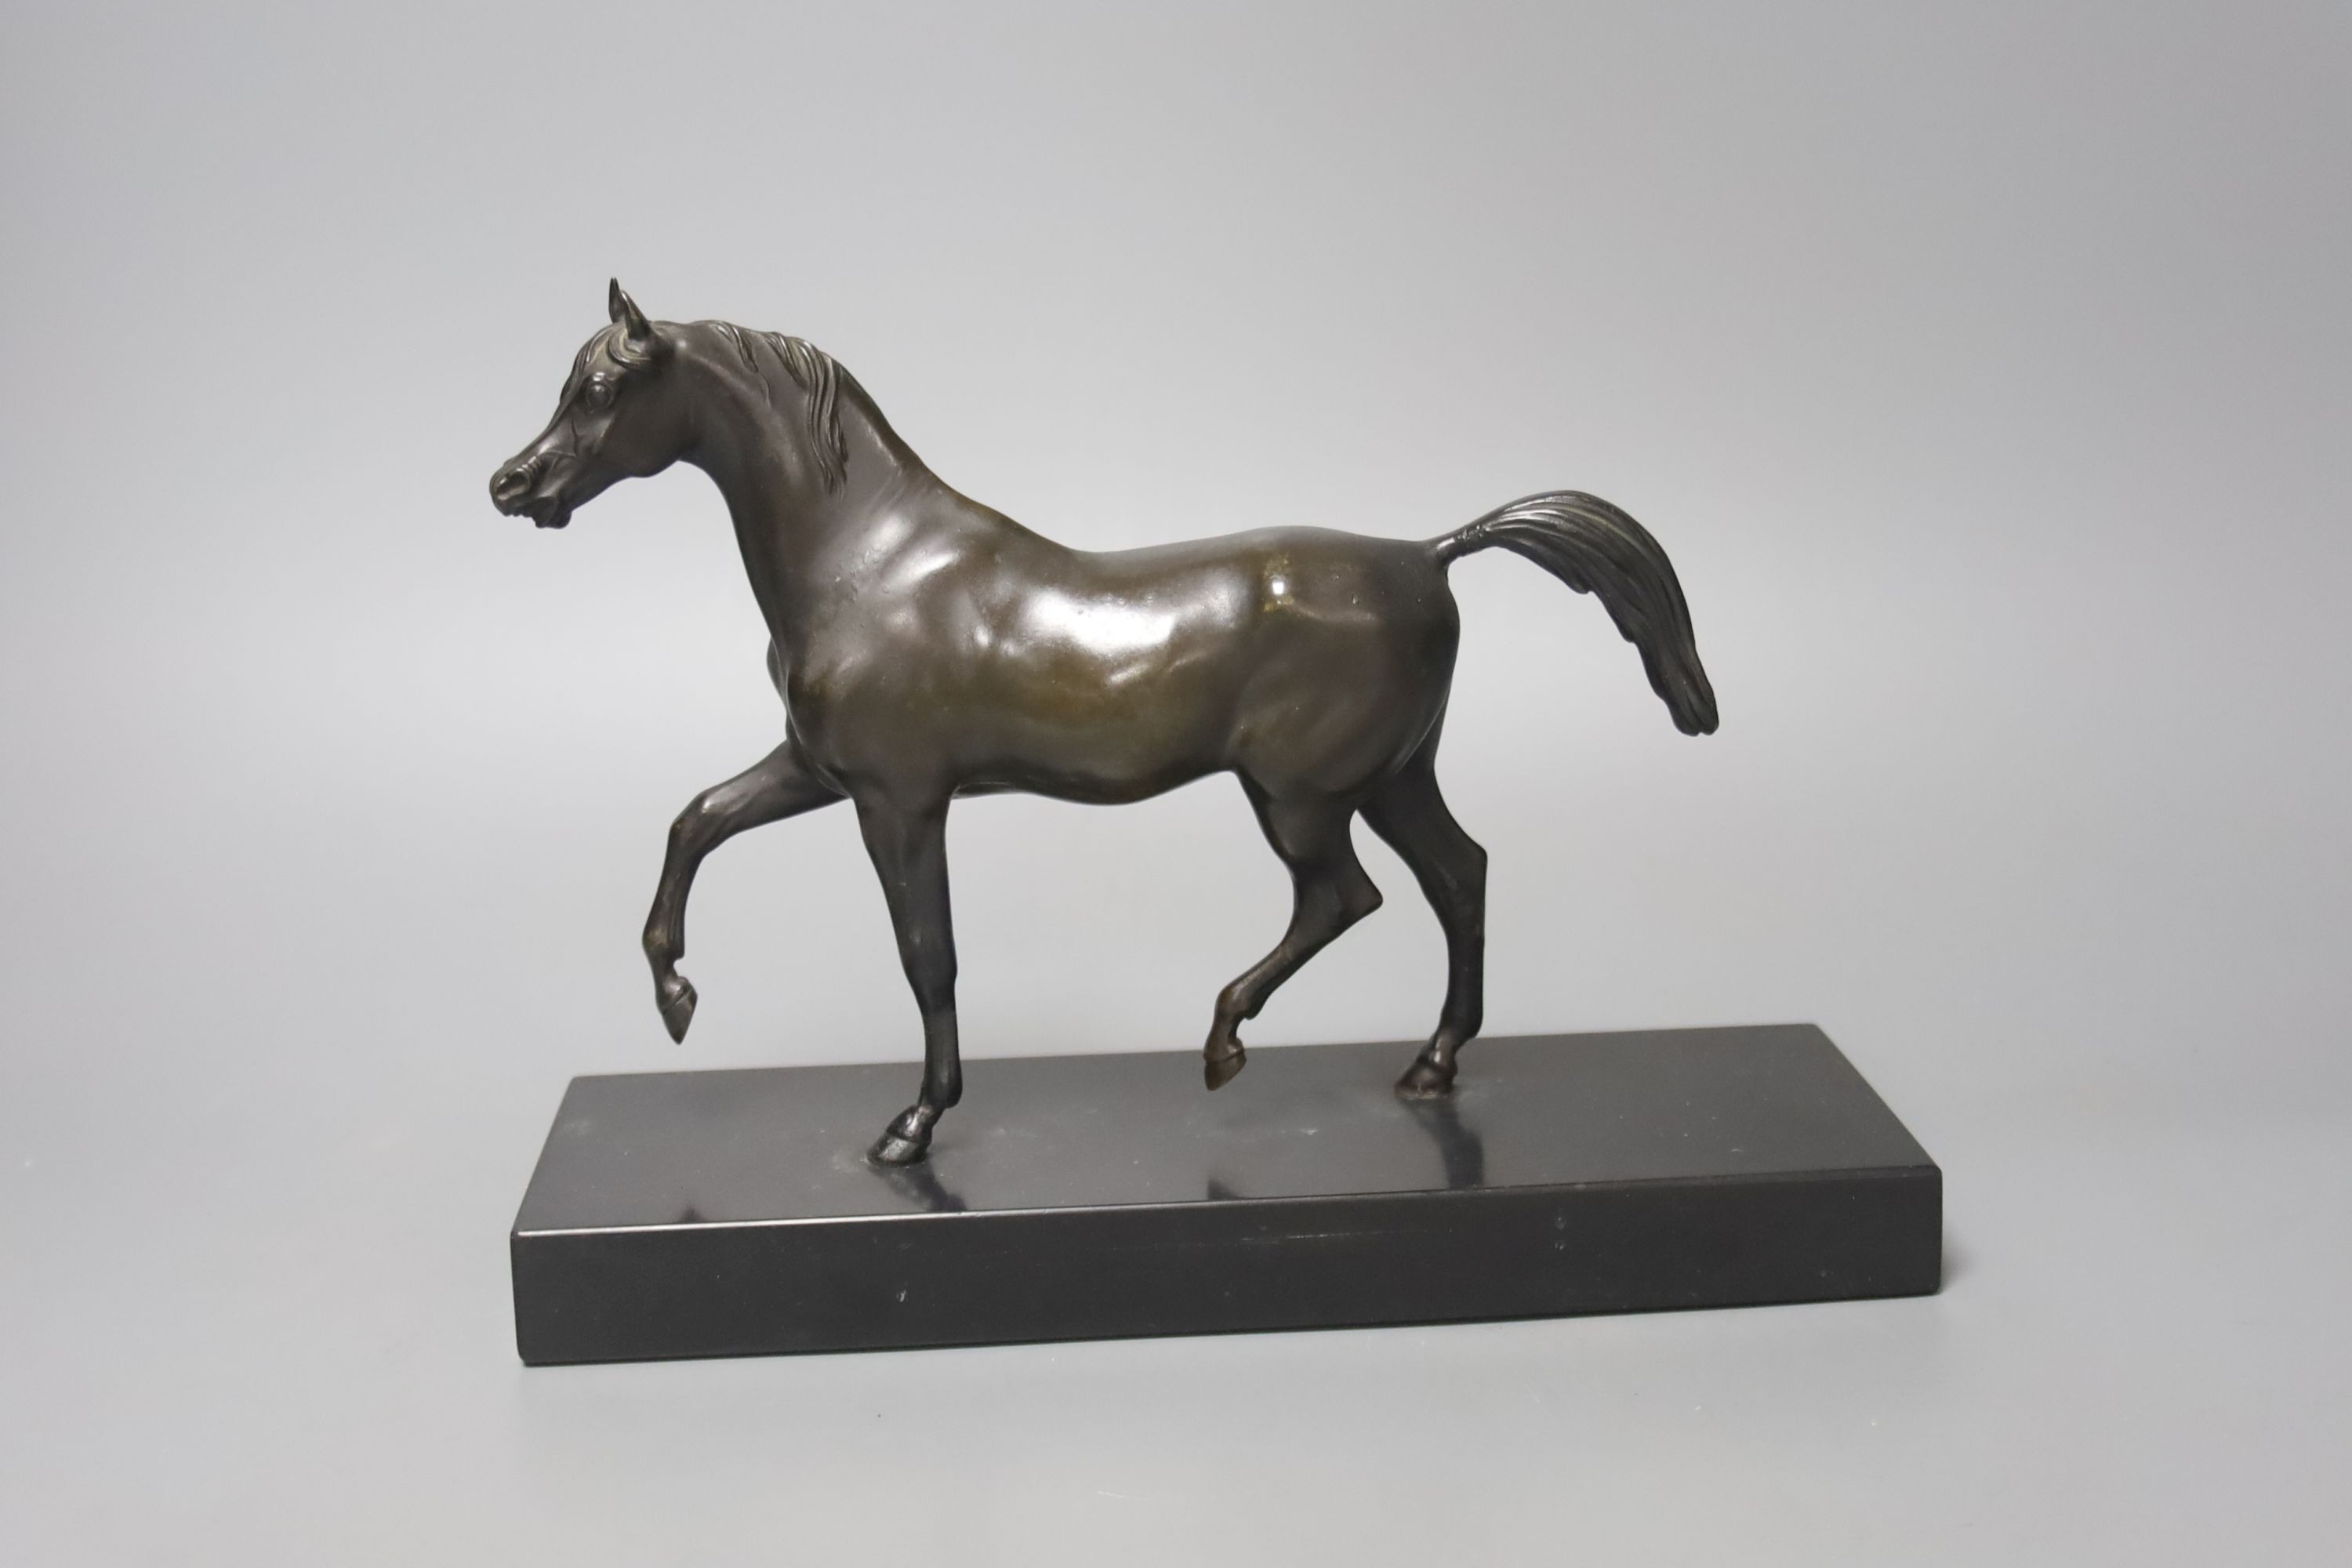 A bronze figure of a prancing horse, on a black marble plinth, 26cm